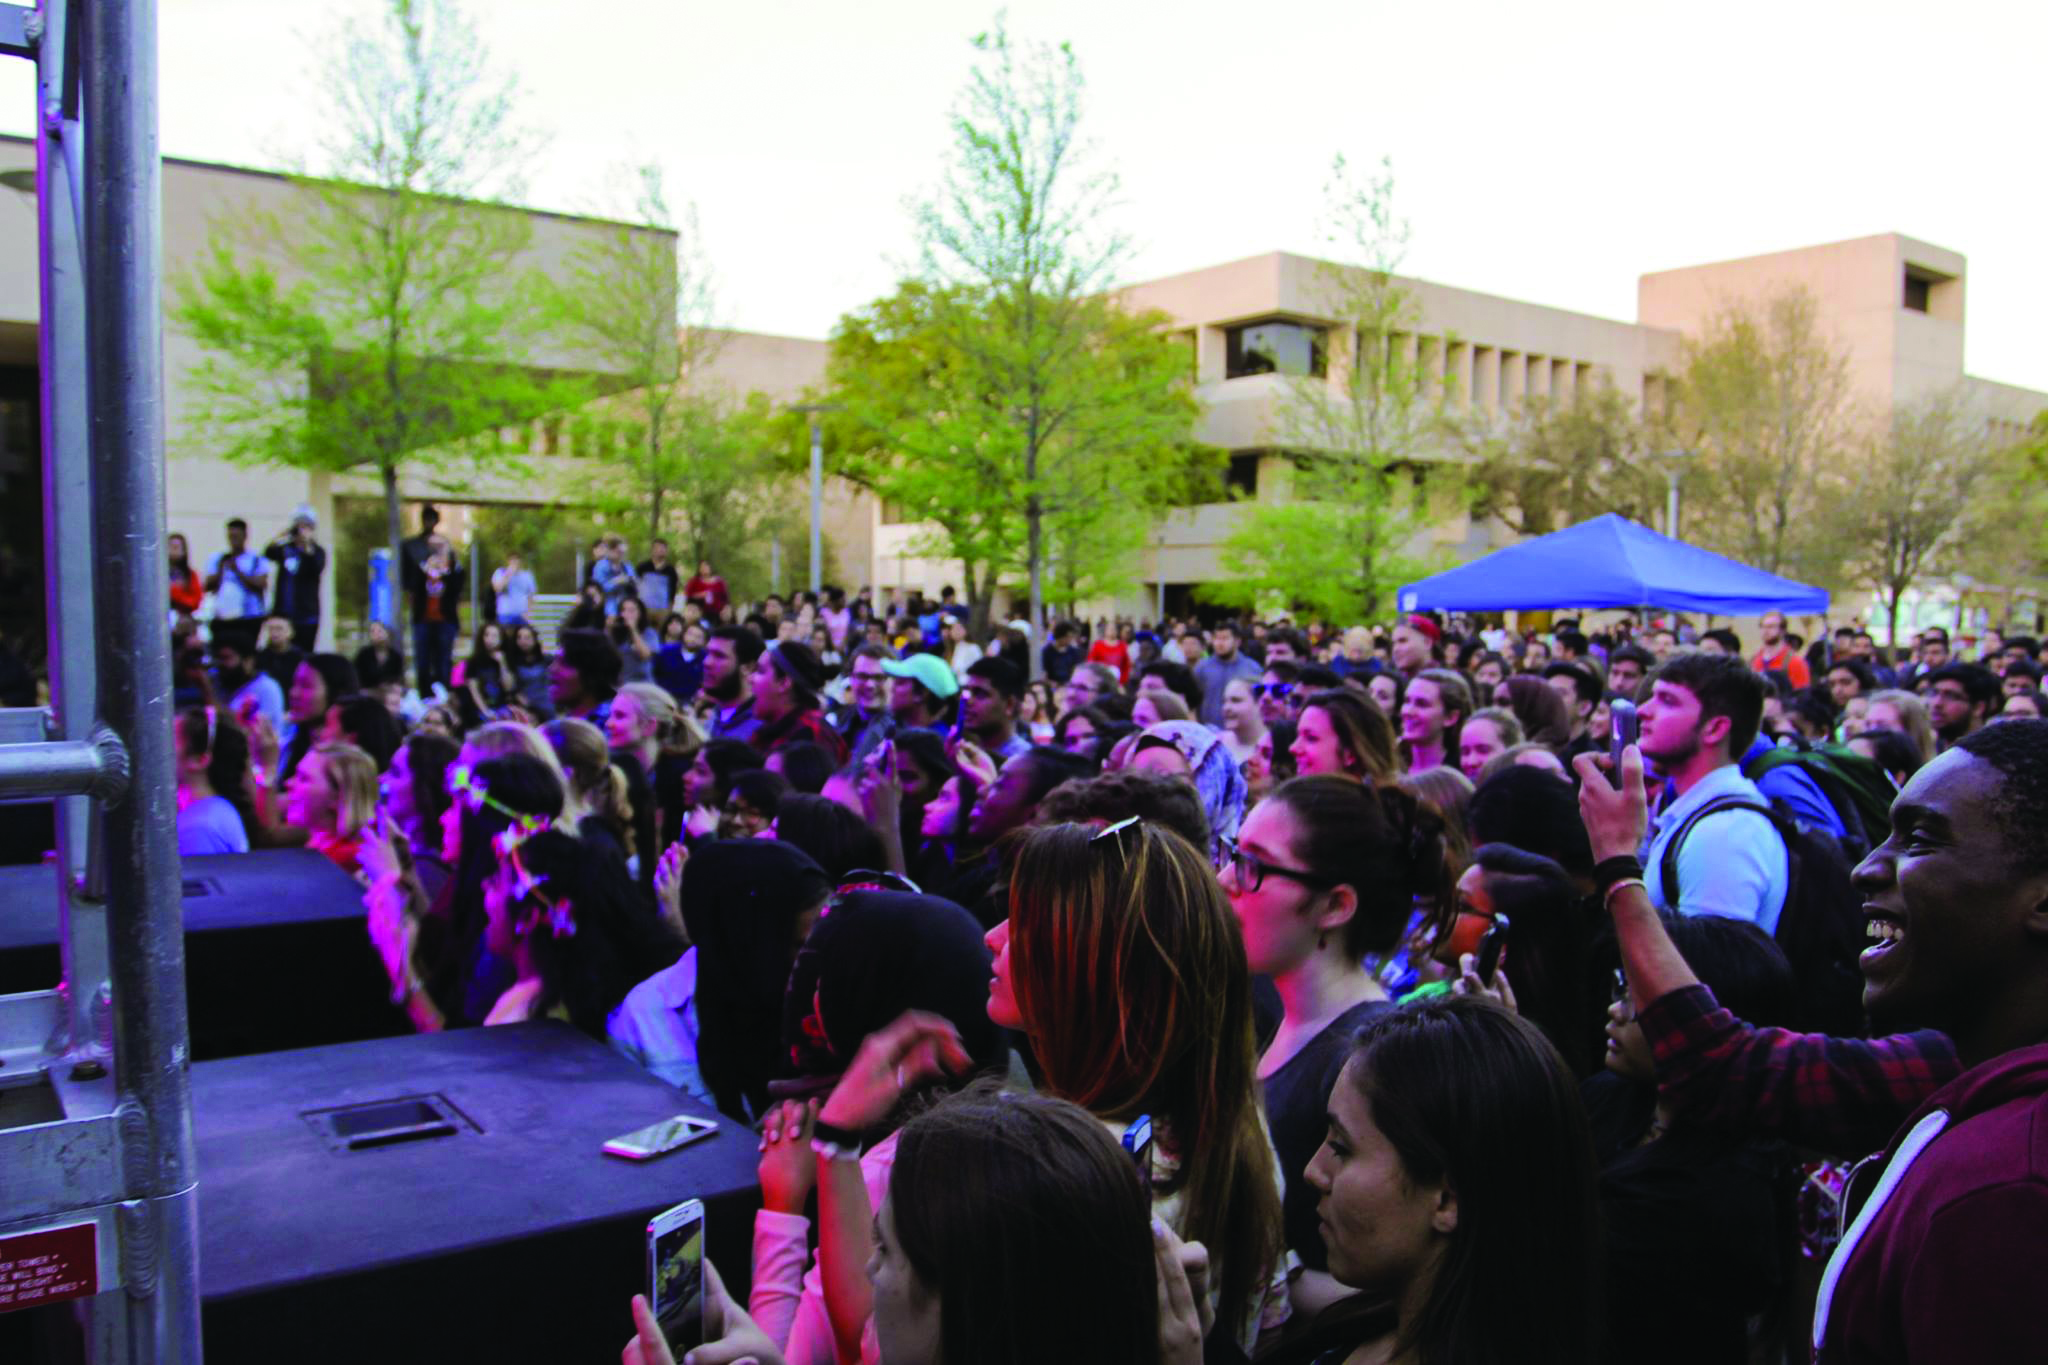 A crowd watches Alex and Sierra perform